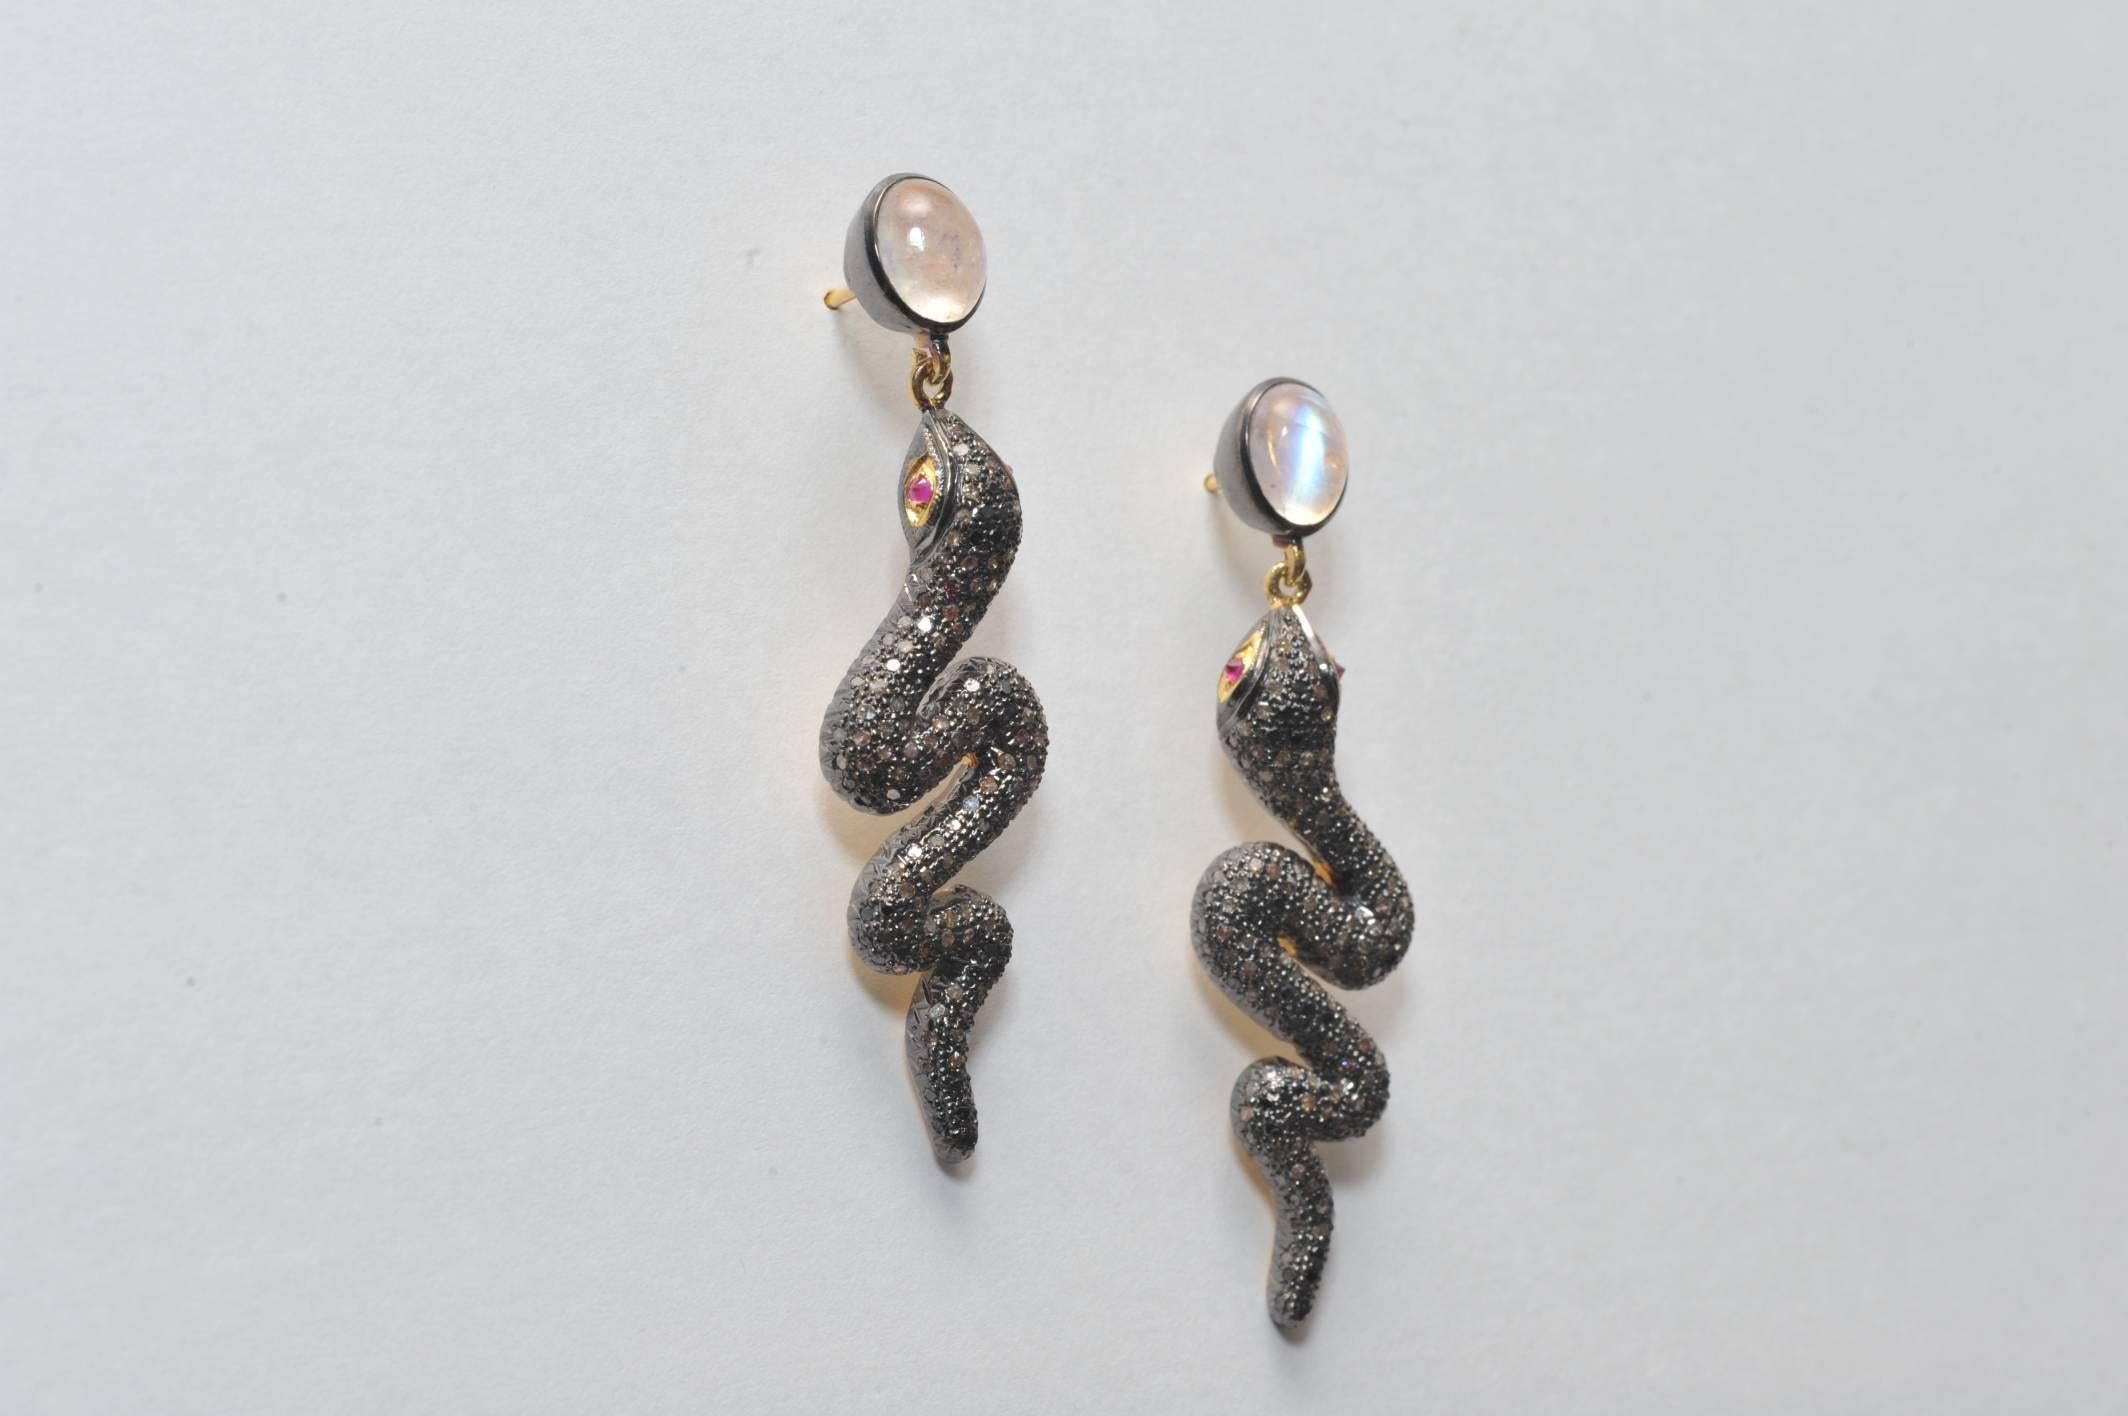 Pave` set diamond snake earrings in oxidized sterling with 18K gold posts with rose quartz cabochon posts and ruby eyes.  Post is 1/4